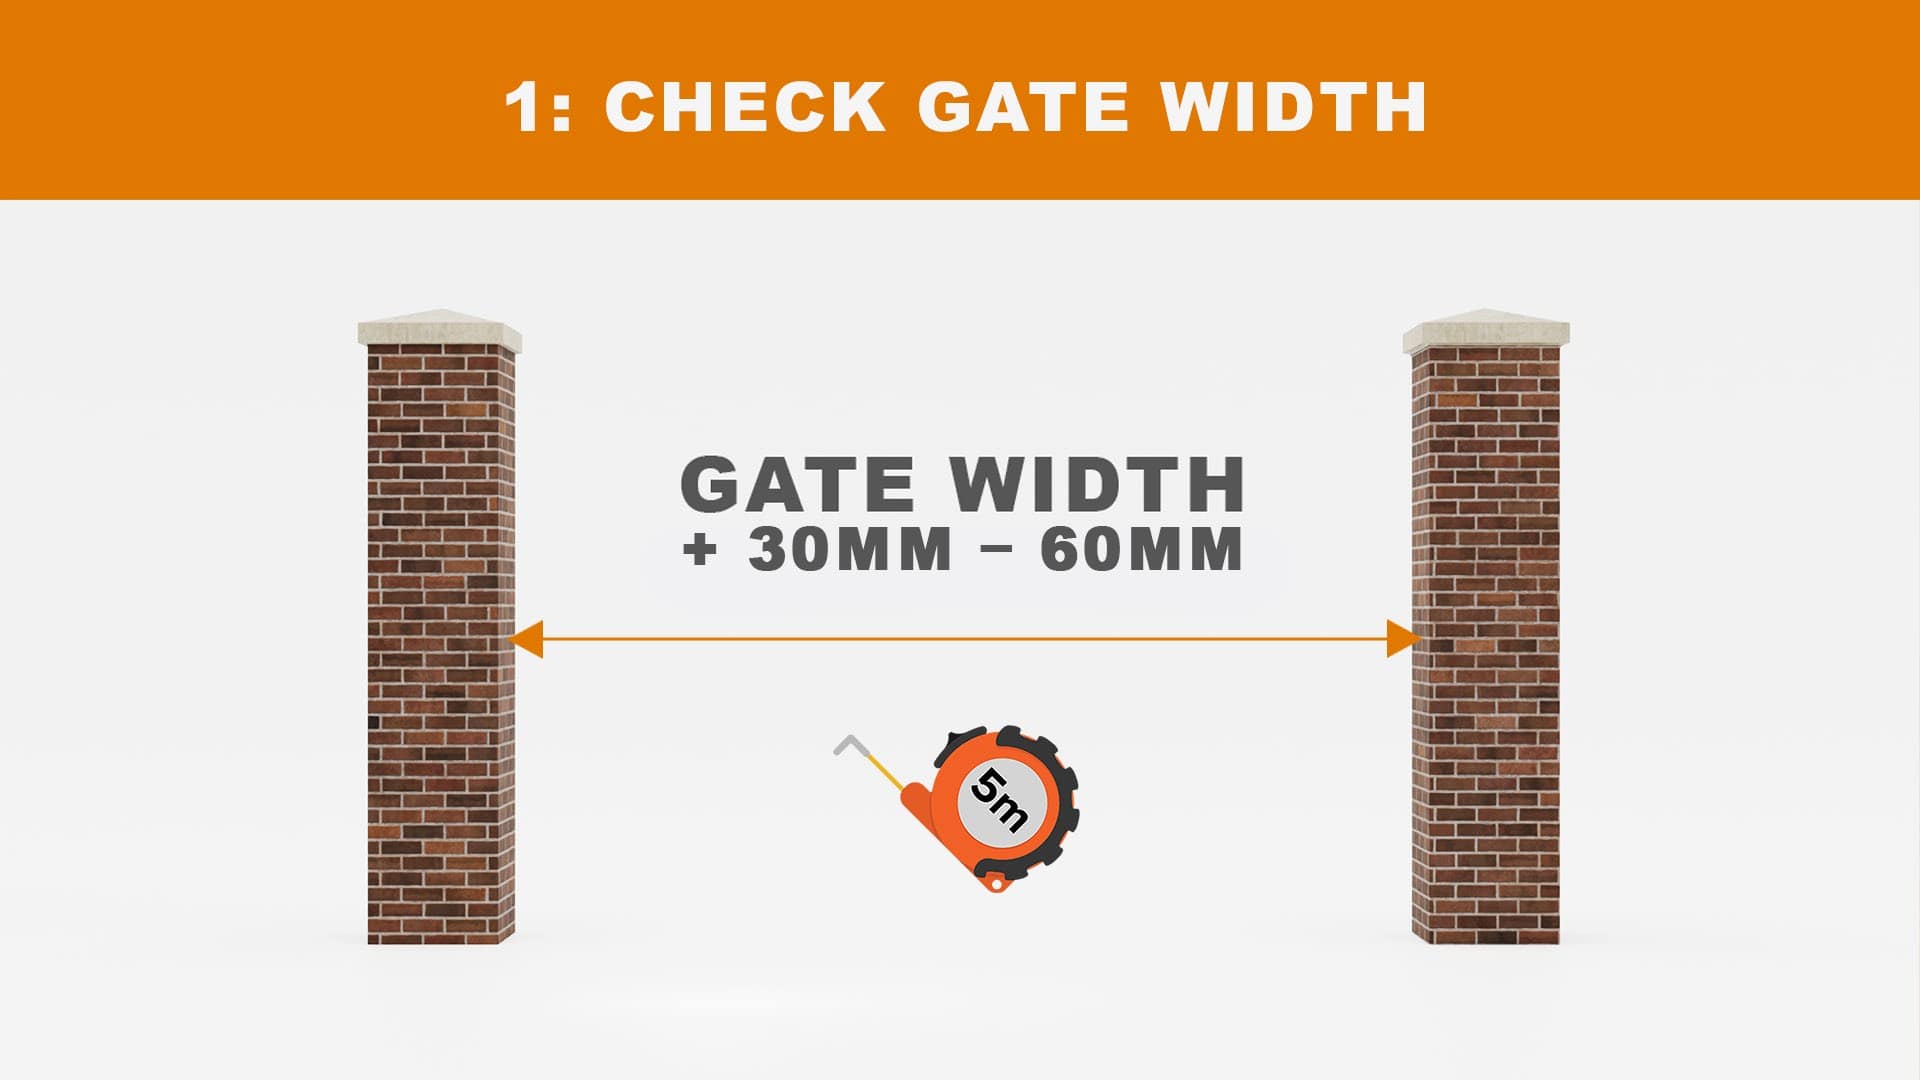 Check the gate width diagram